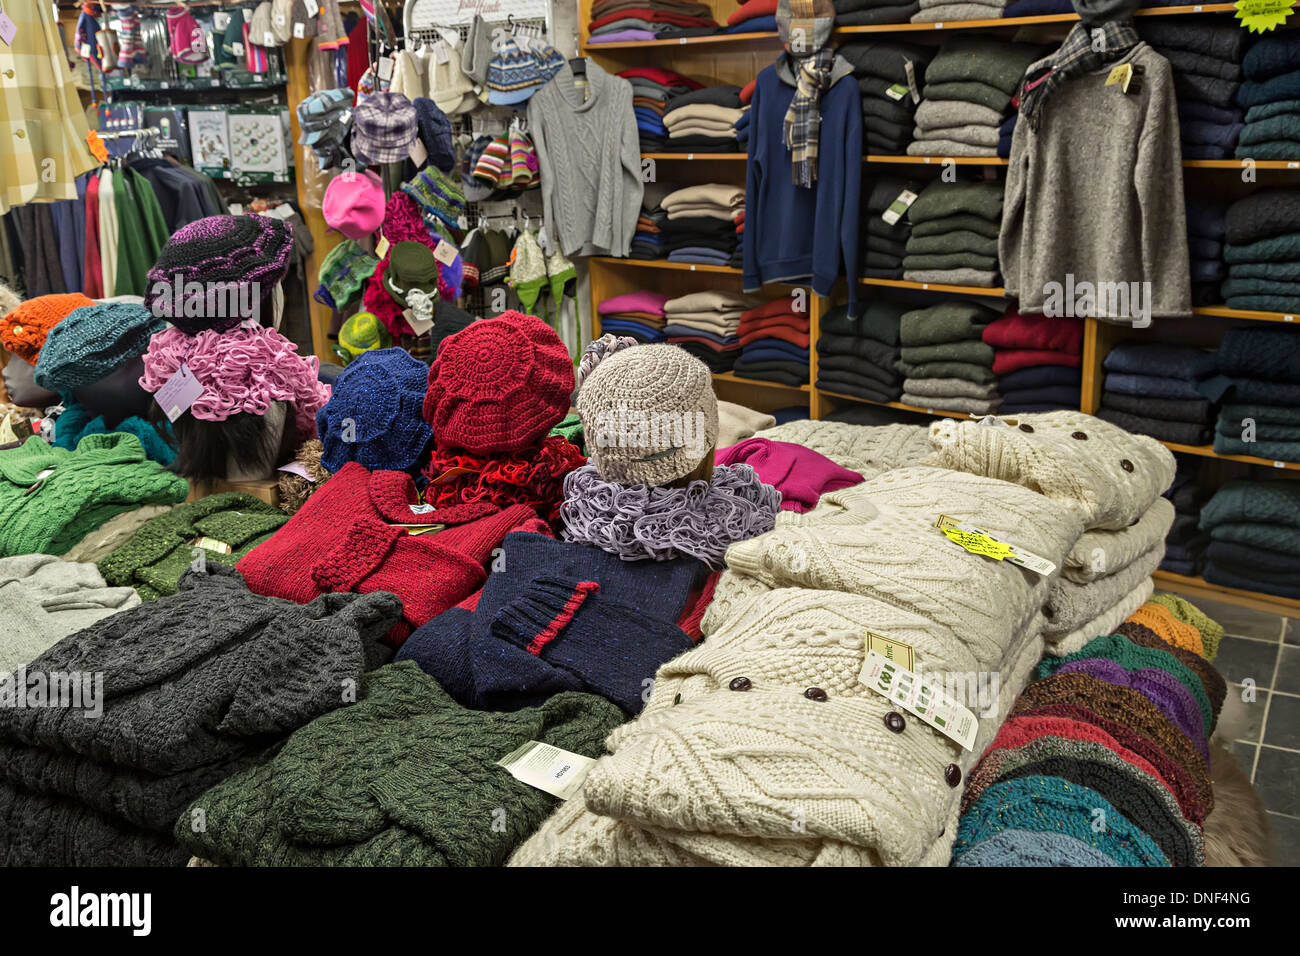 Aran sweaters and knitted goods on sale, Ireland Stock Photo